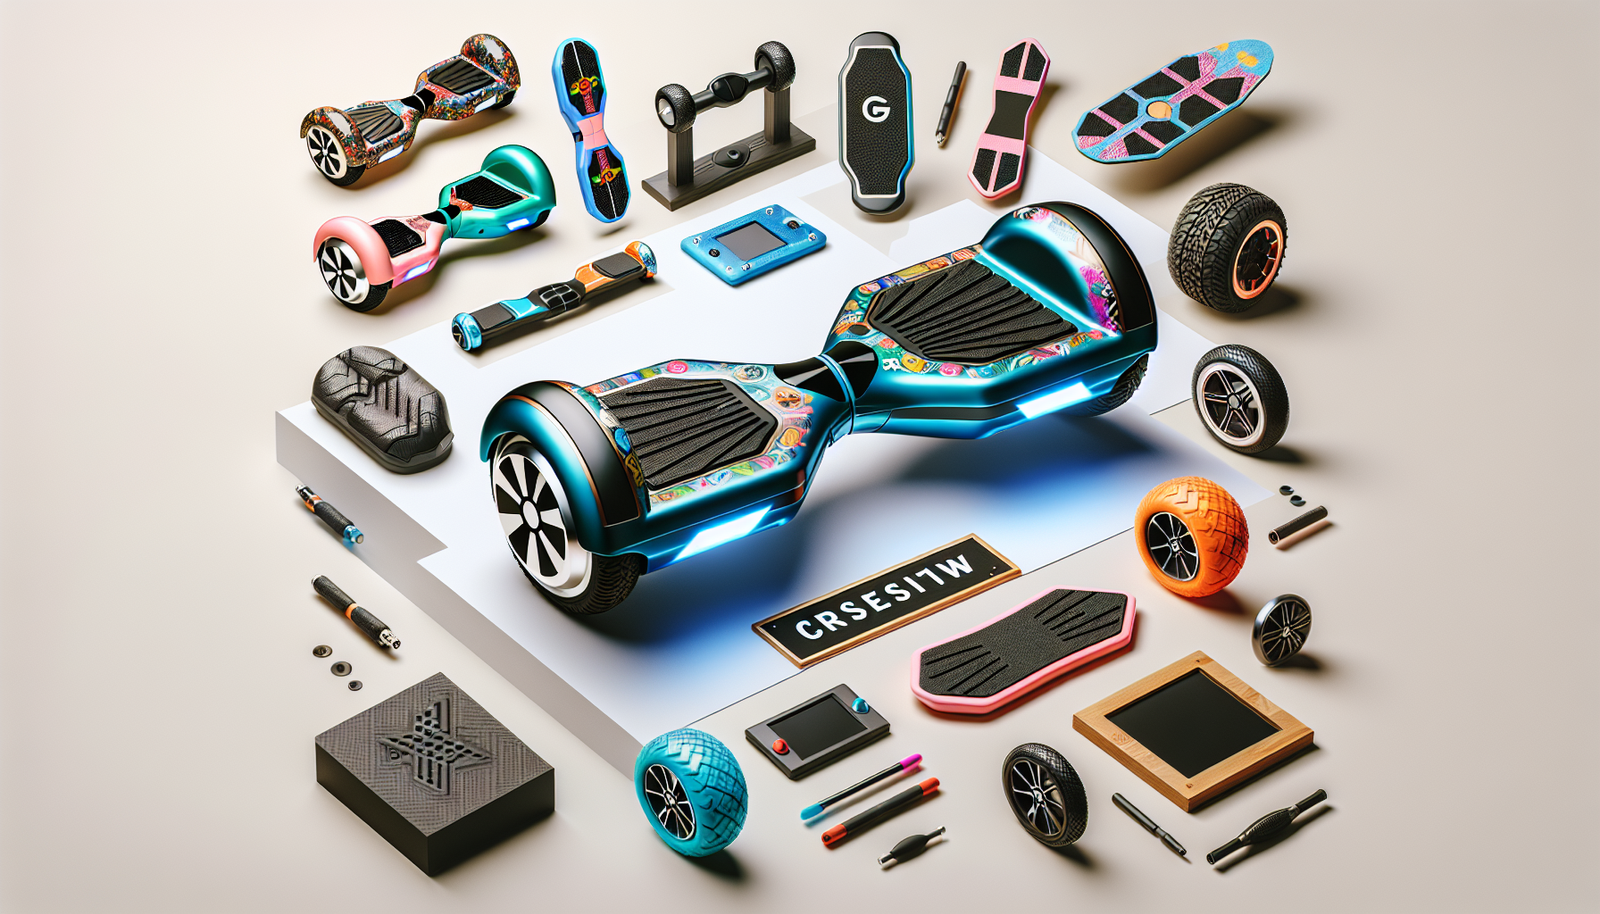 Can I Customize The Appearance Of My Hoverboard With Accessories?